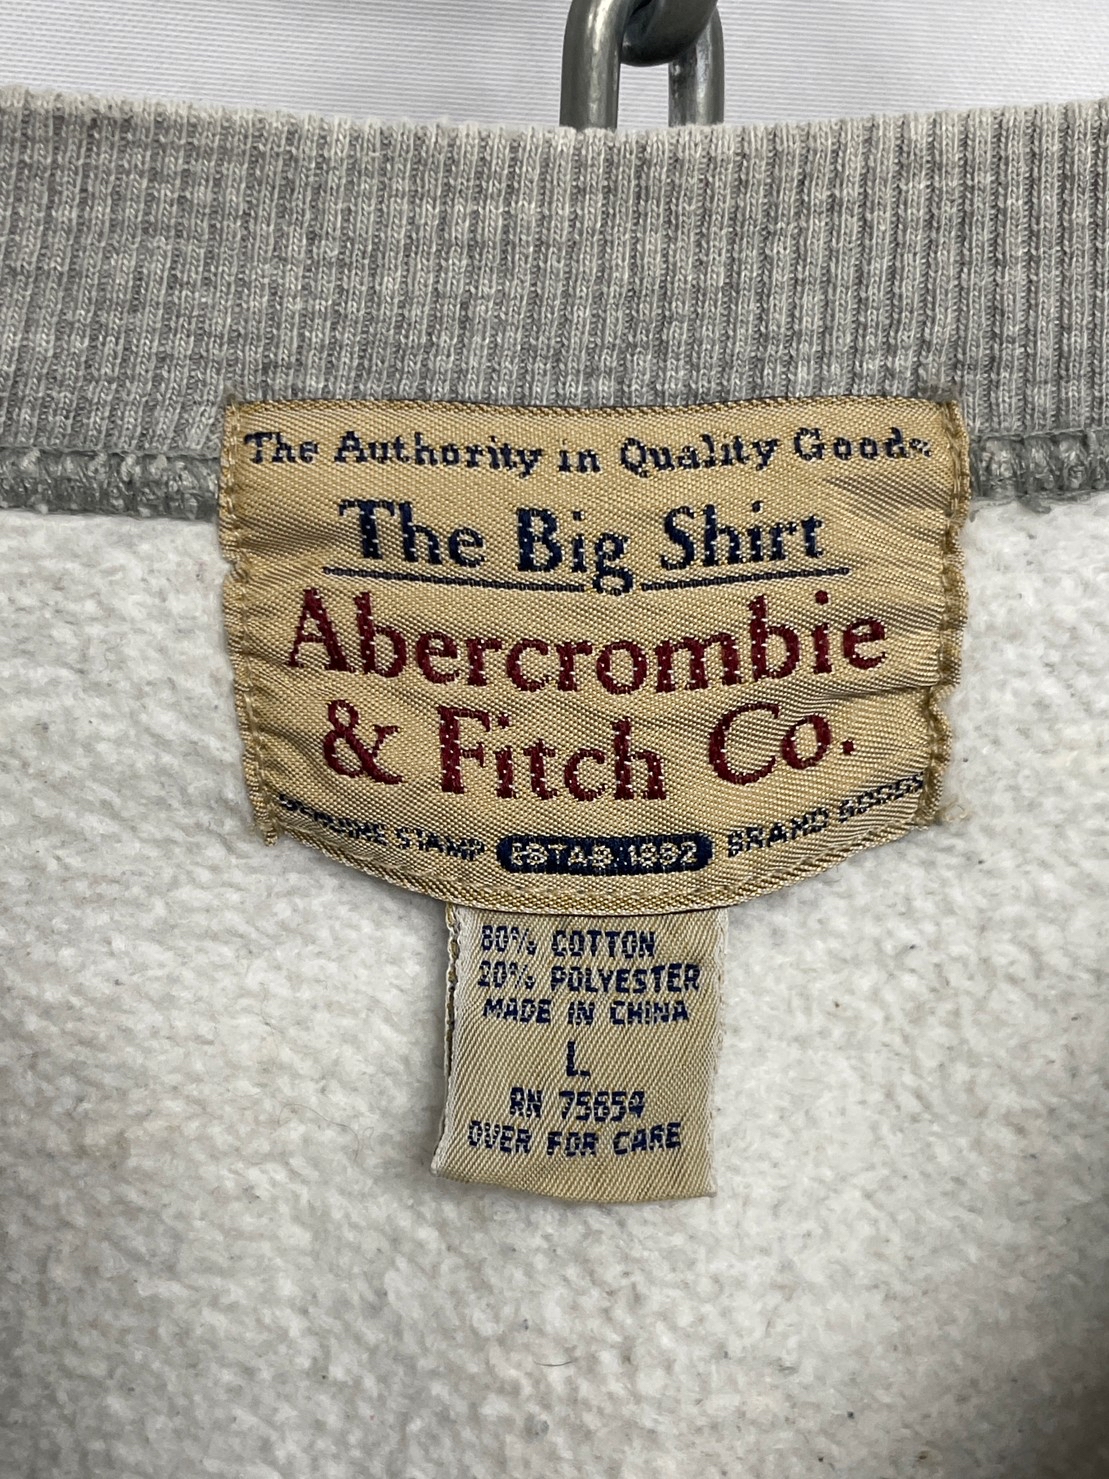 90s “Abercrombie & Fitch” Embroidered SW